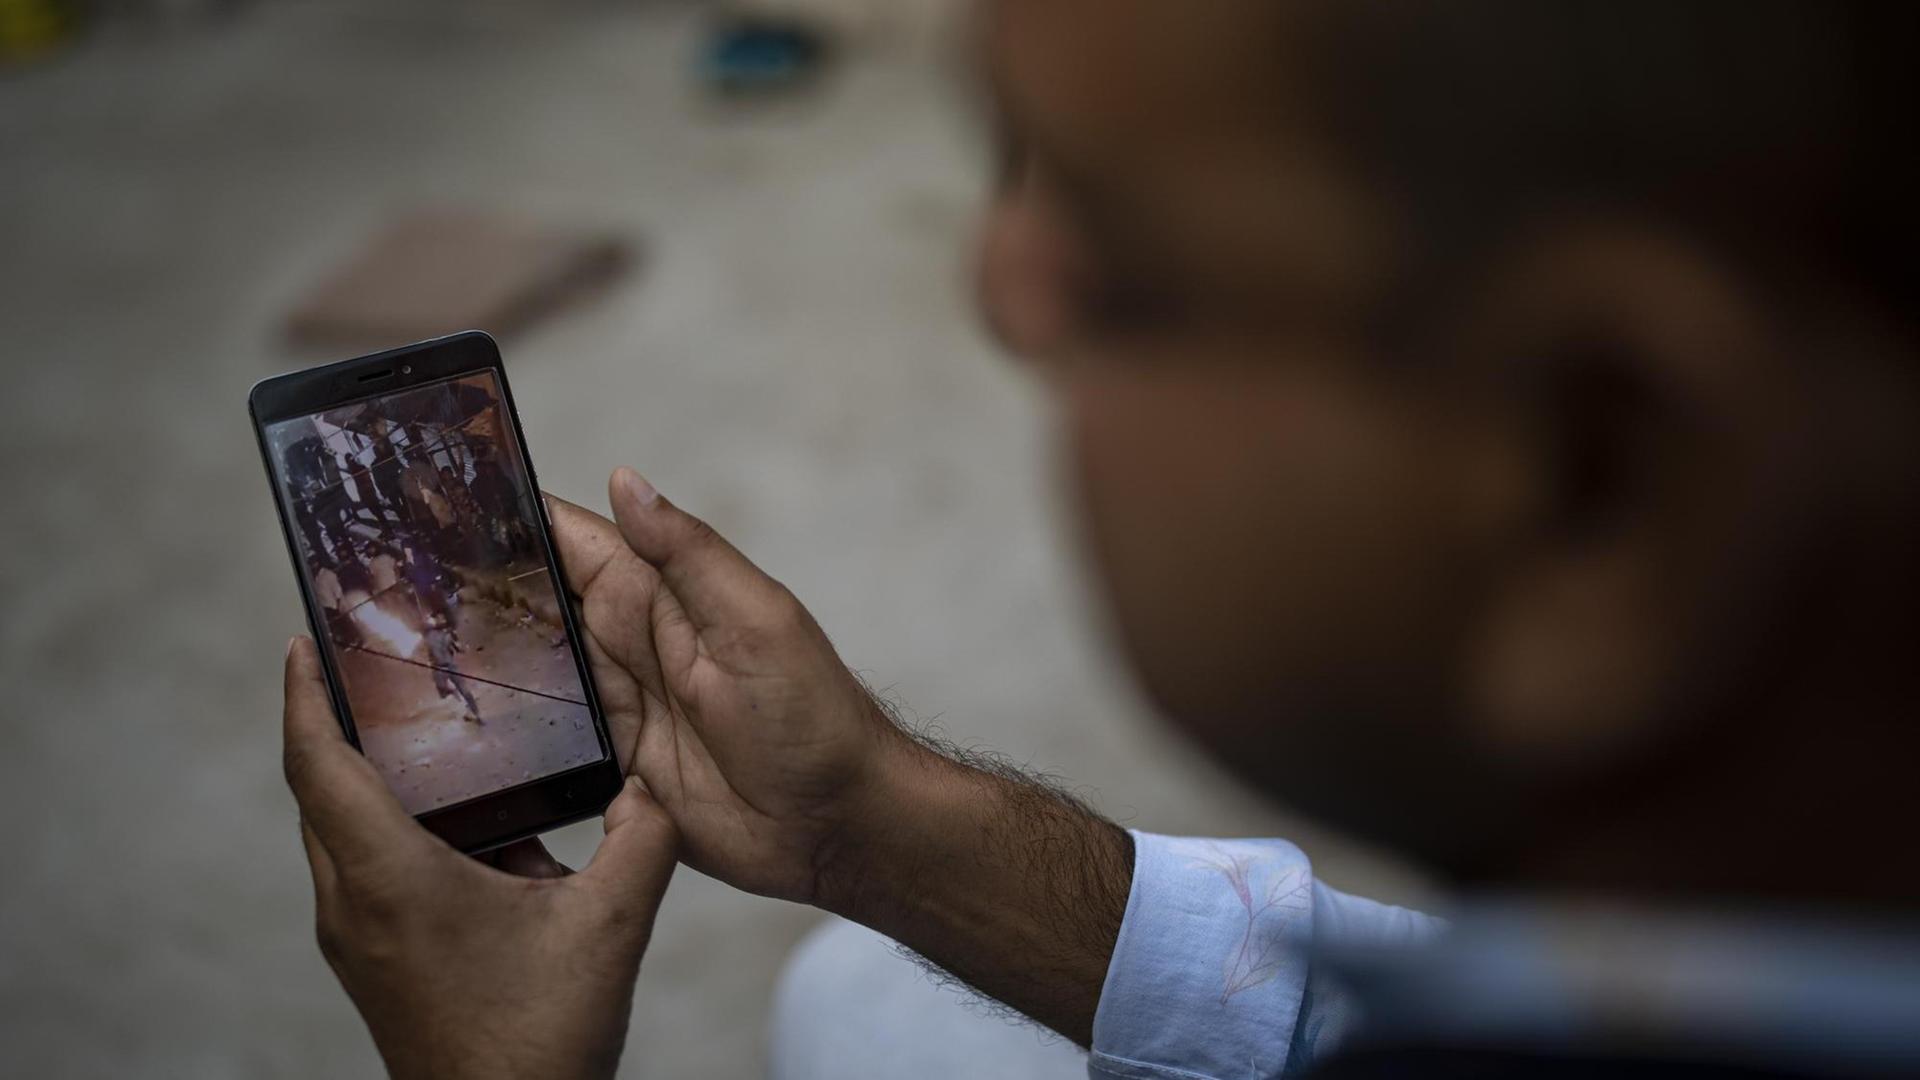 Muhammad Nasir Khan, who was shot by a Hindu mob during the February 2020 communal riots, watches a video showing a Hindu mob throwing petrol bomb towards a Muslim house in North Ghonda, one of the worst riot affected neighborhood, in New Delhi, India, Friday, Feb. 19, 2021. As the first anniversary of bloody communal riots that convulsed the Indian capital approaches, Muslim victims are still shaken and struggling to make sense of their struggle to seek justice. (AP Photo/Altaf Qadri)